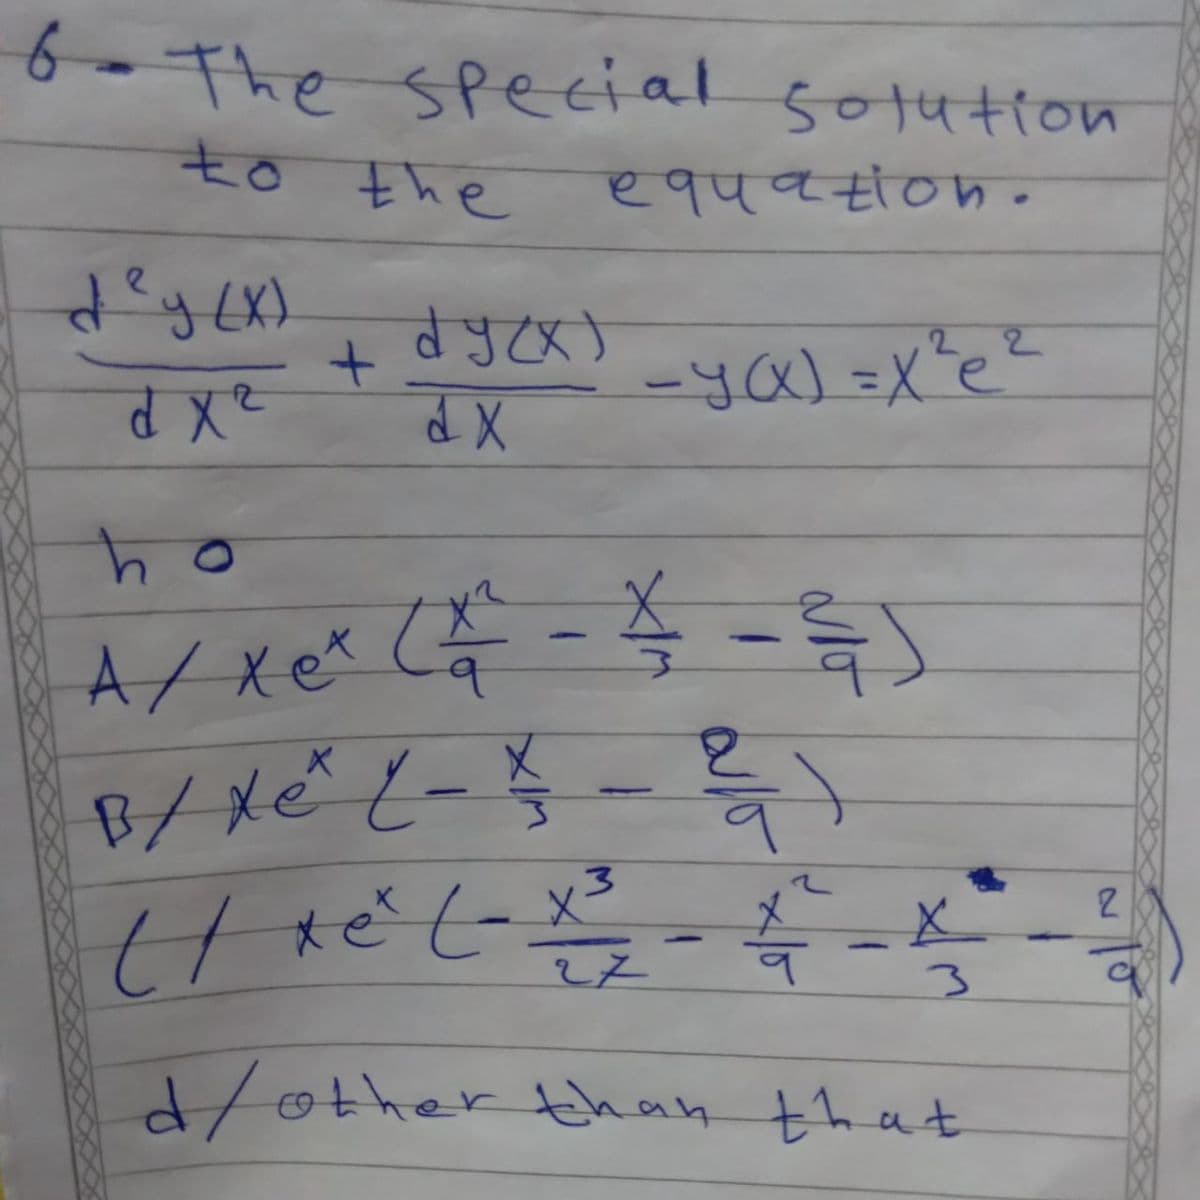 6- The special sotution
to the
र१पपं०n.
22
-ya) =x"e?
X P
o4
3.
d/other than that
